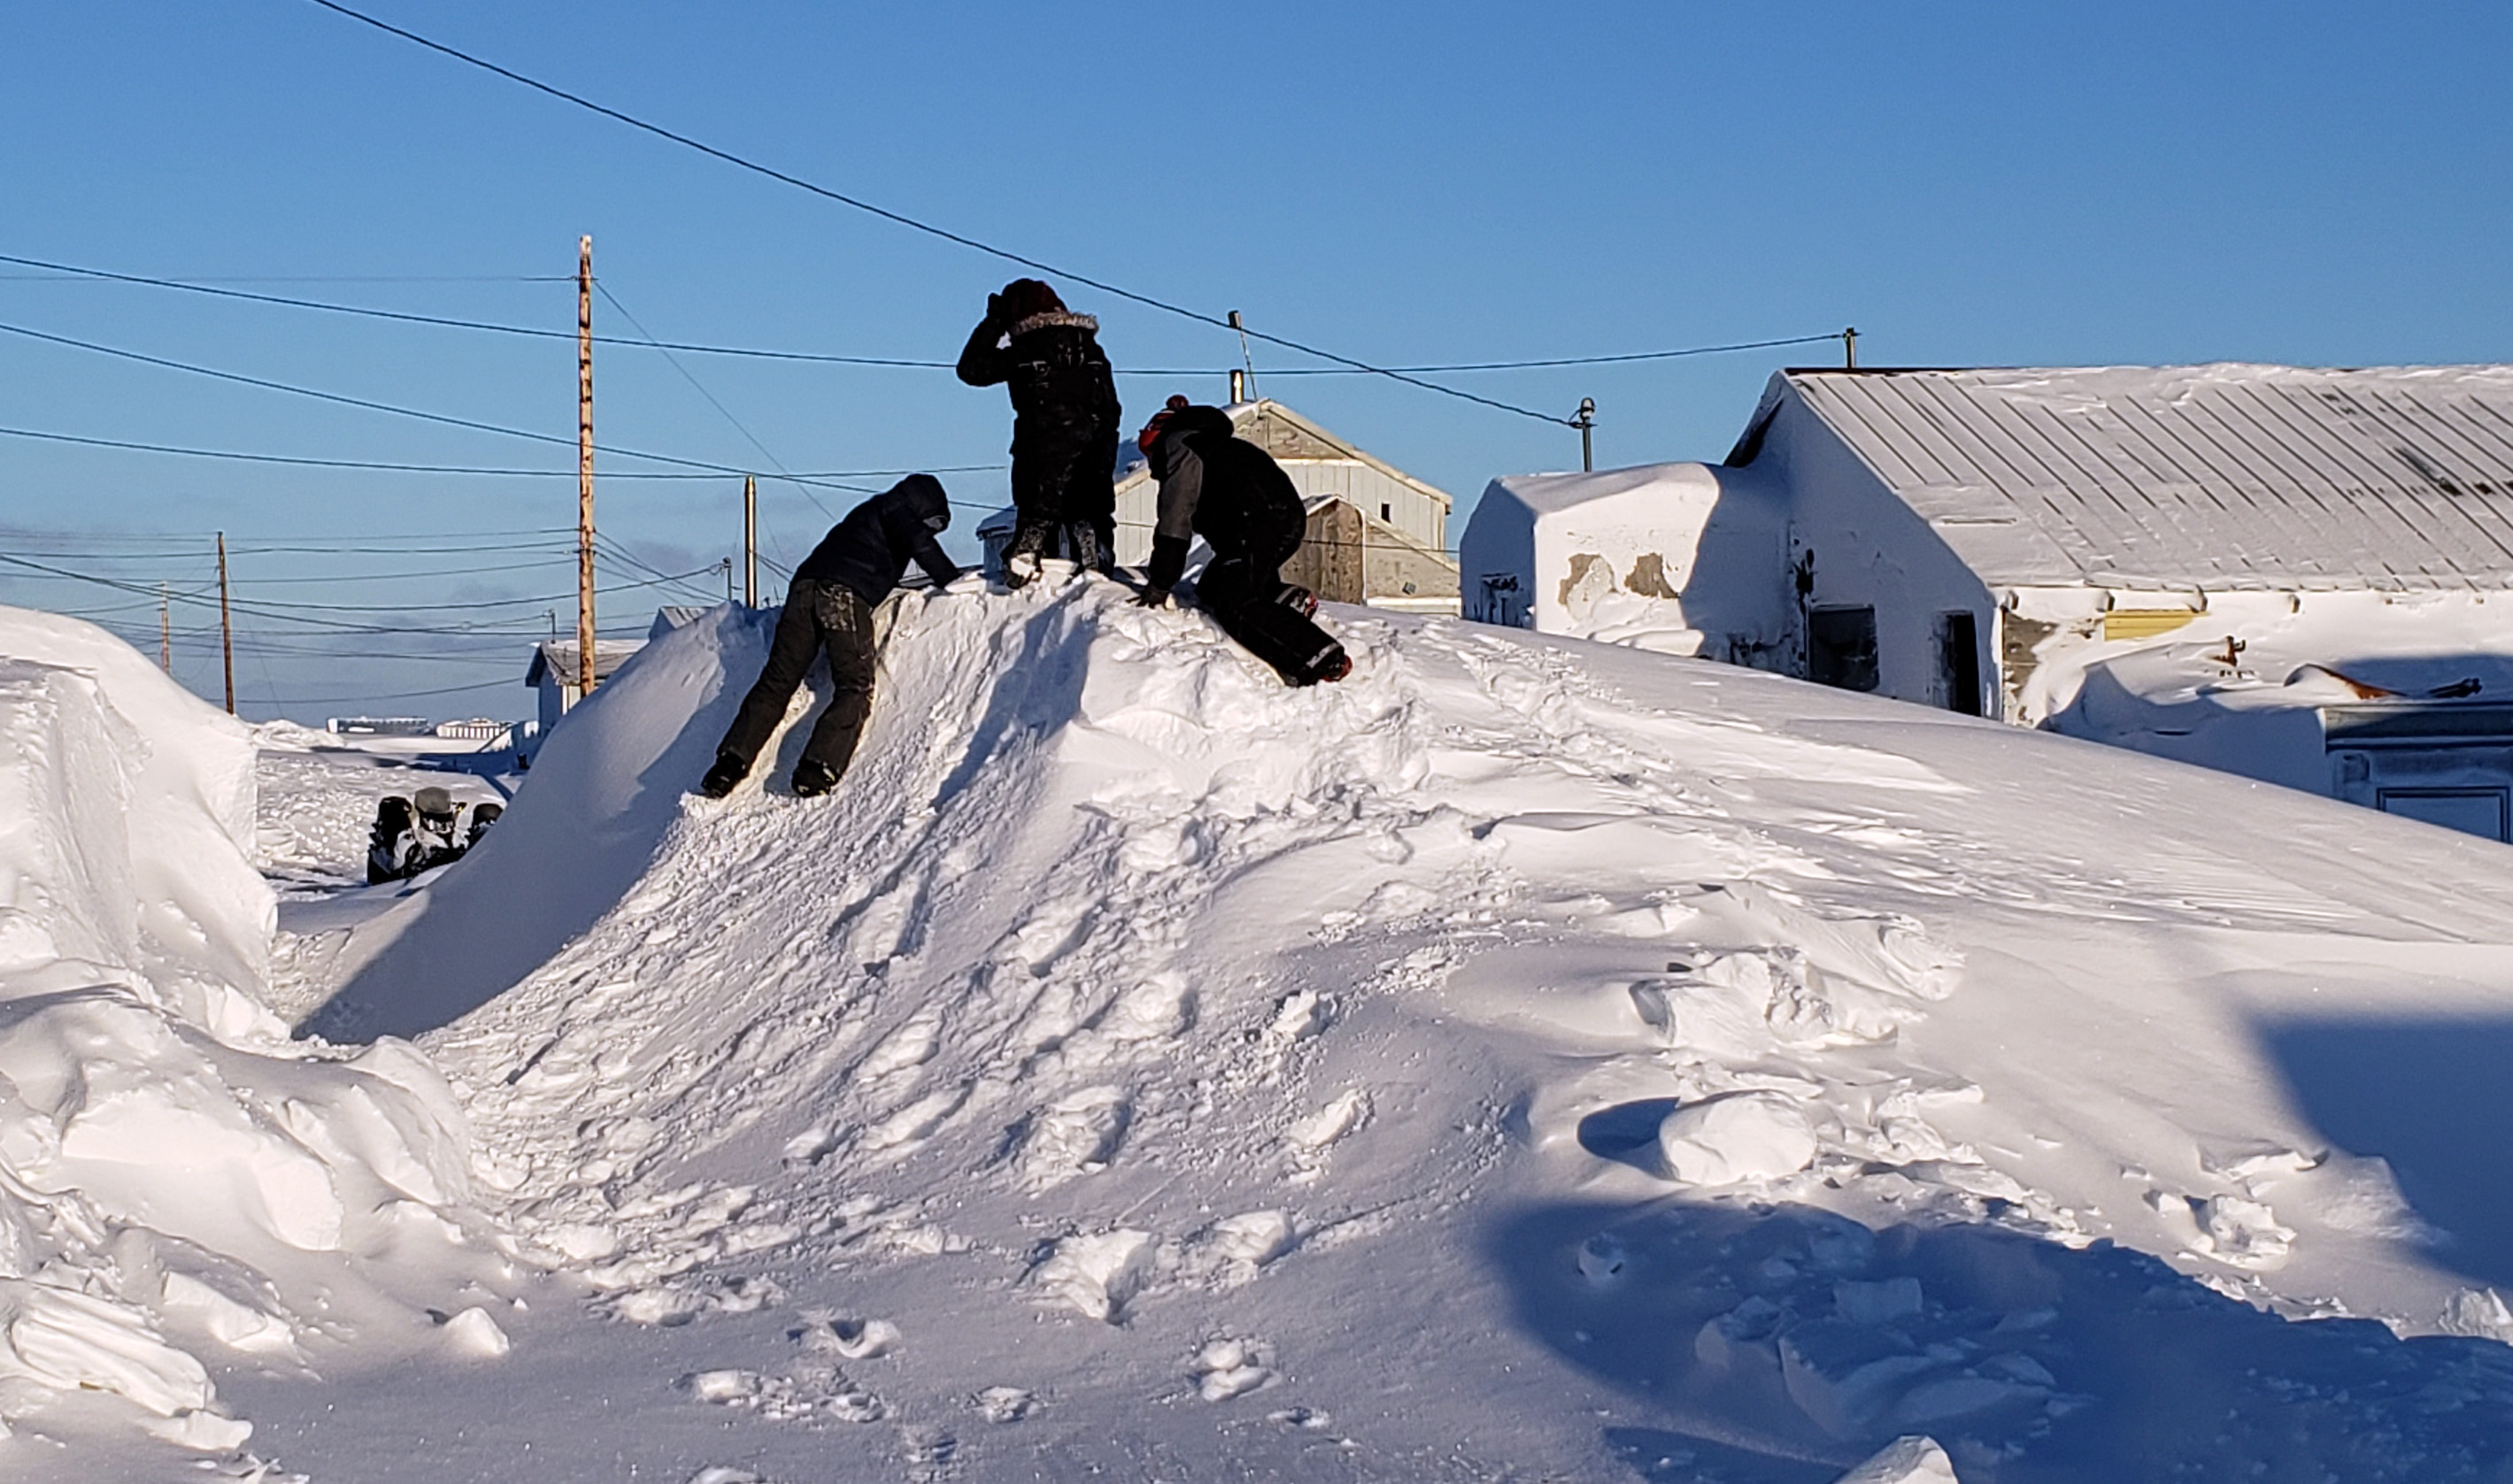 Children play on a hill of snow